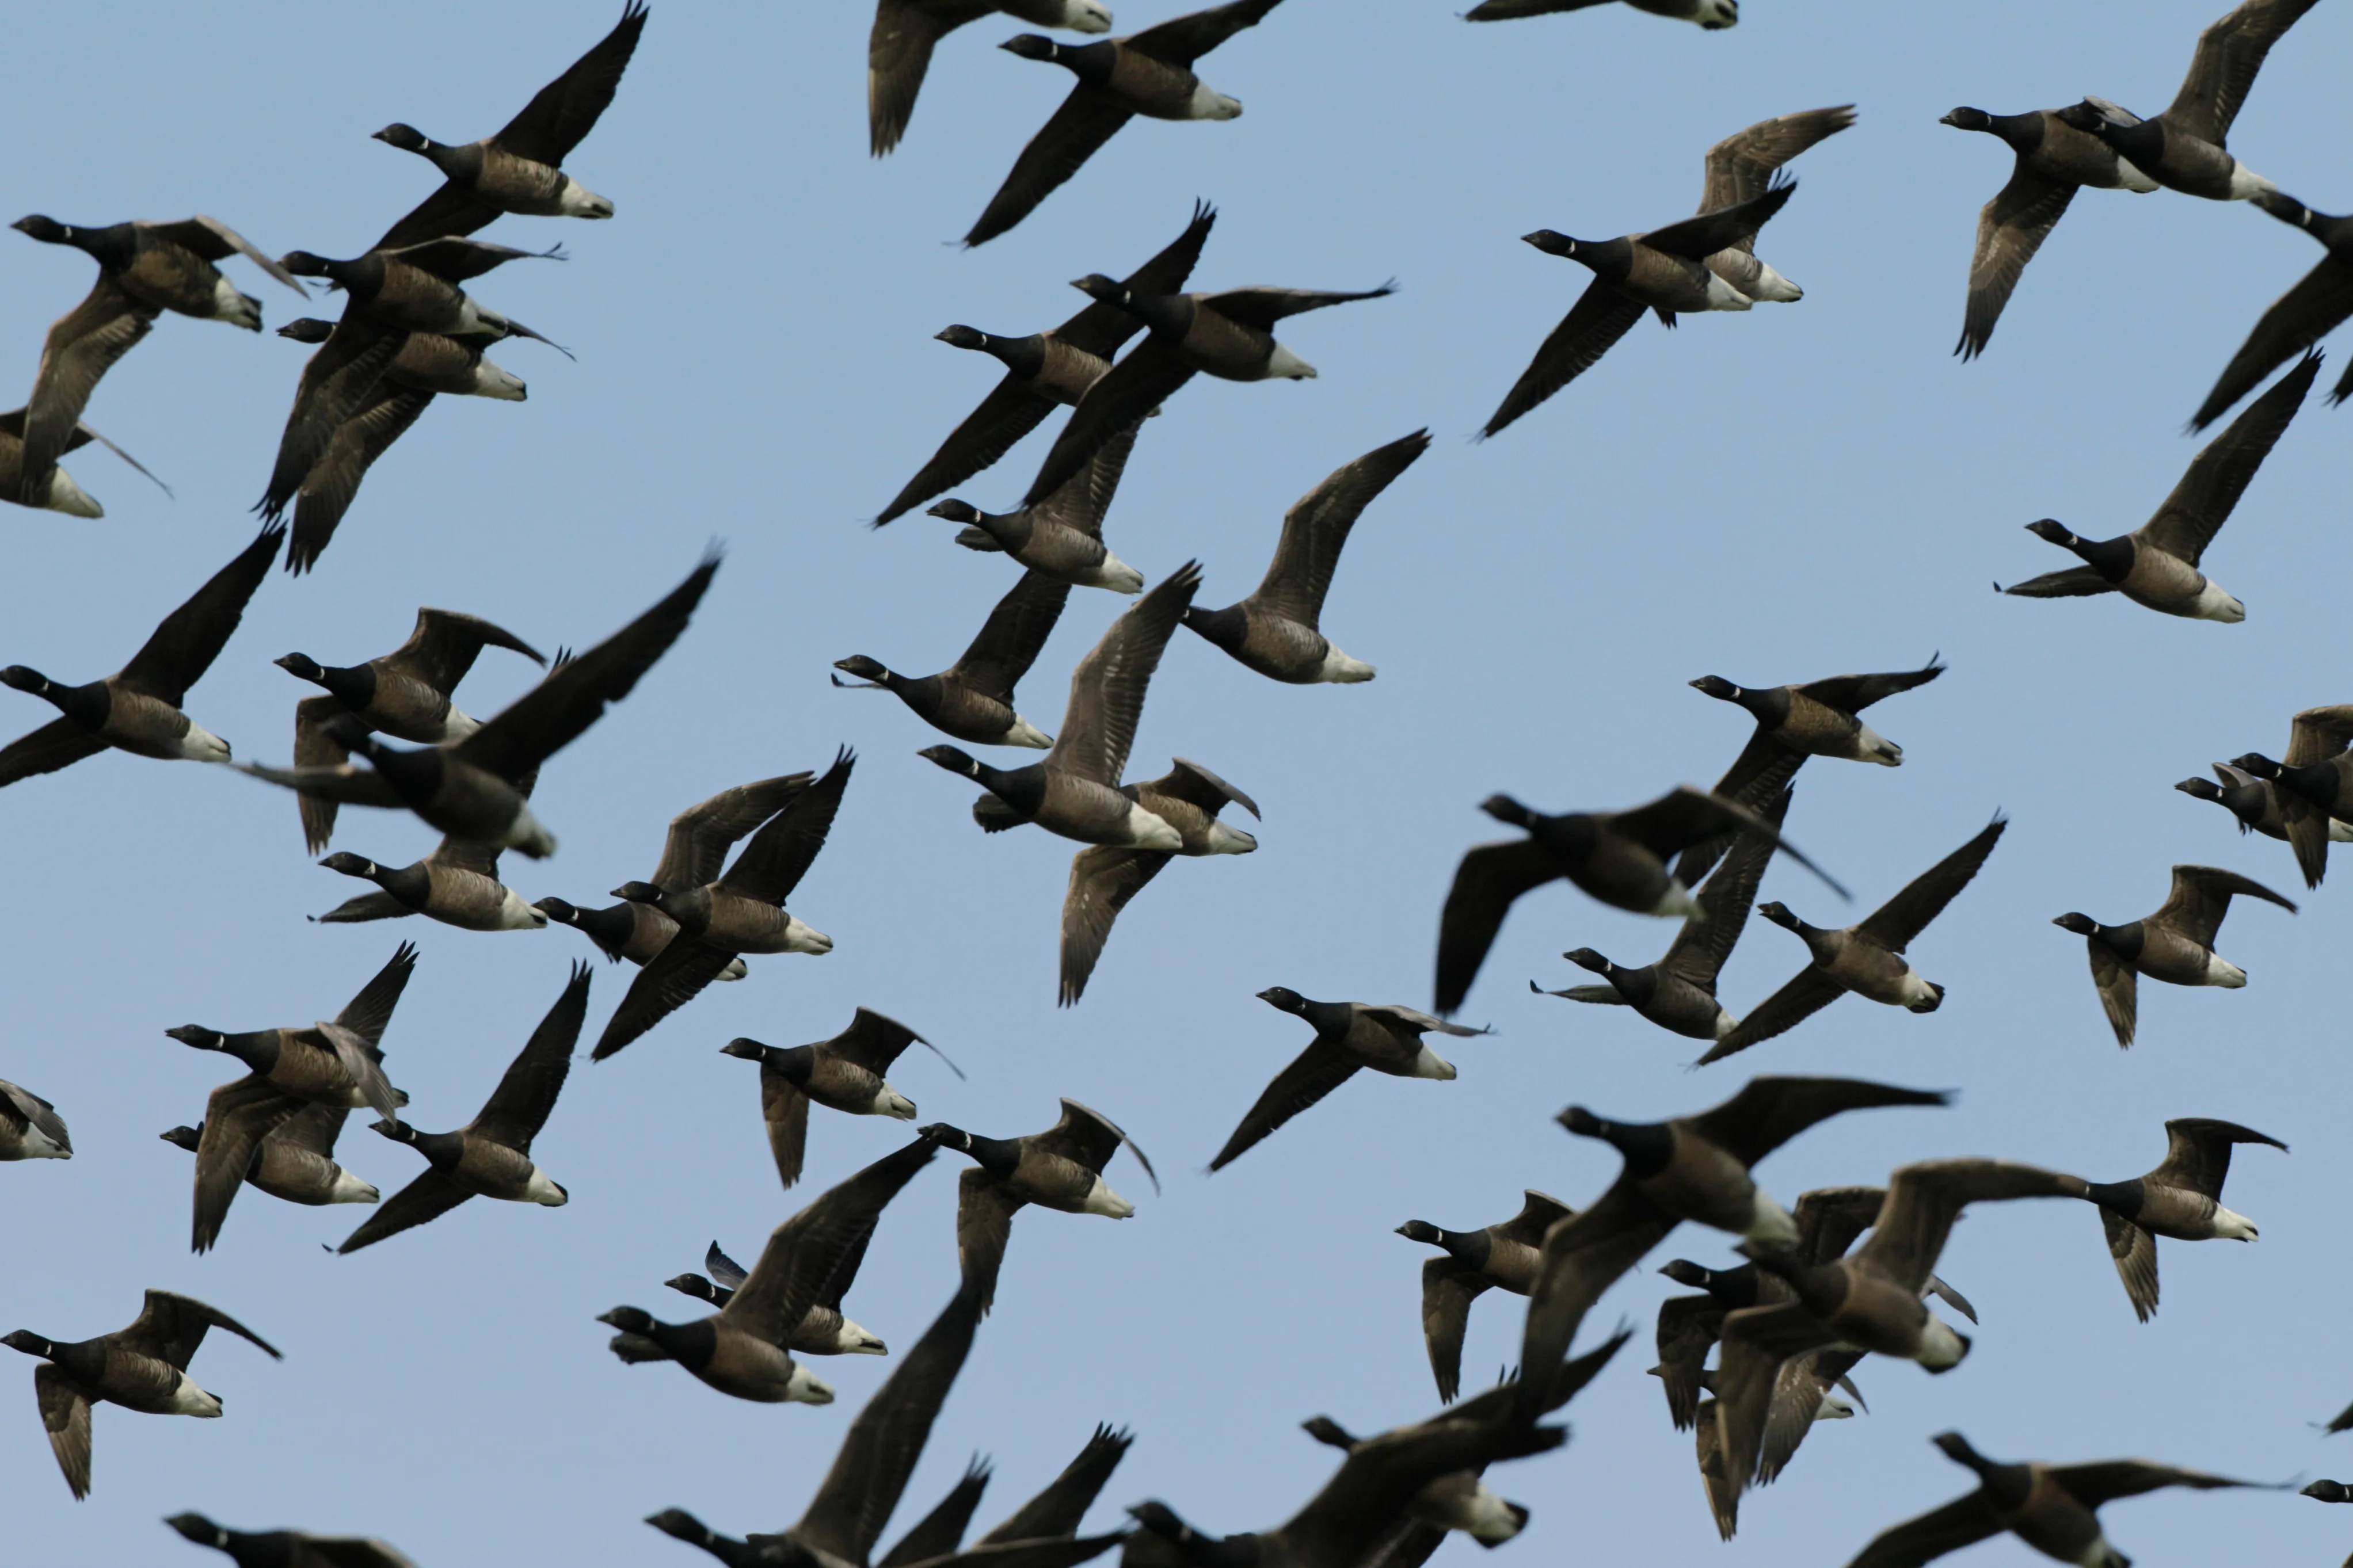 A skein of Brent Geese flying low over wetland.